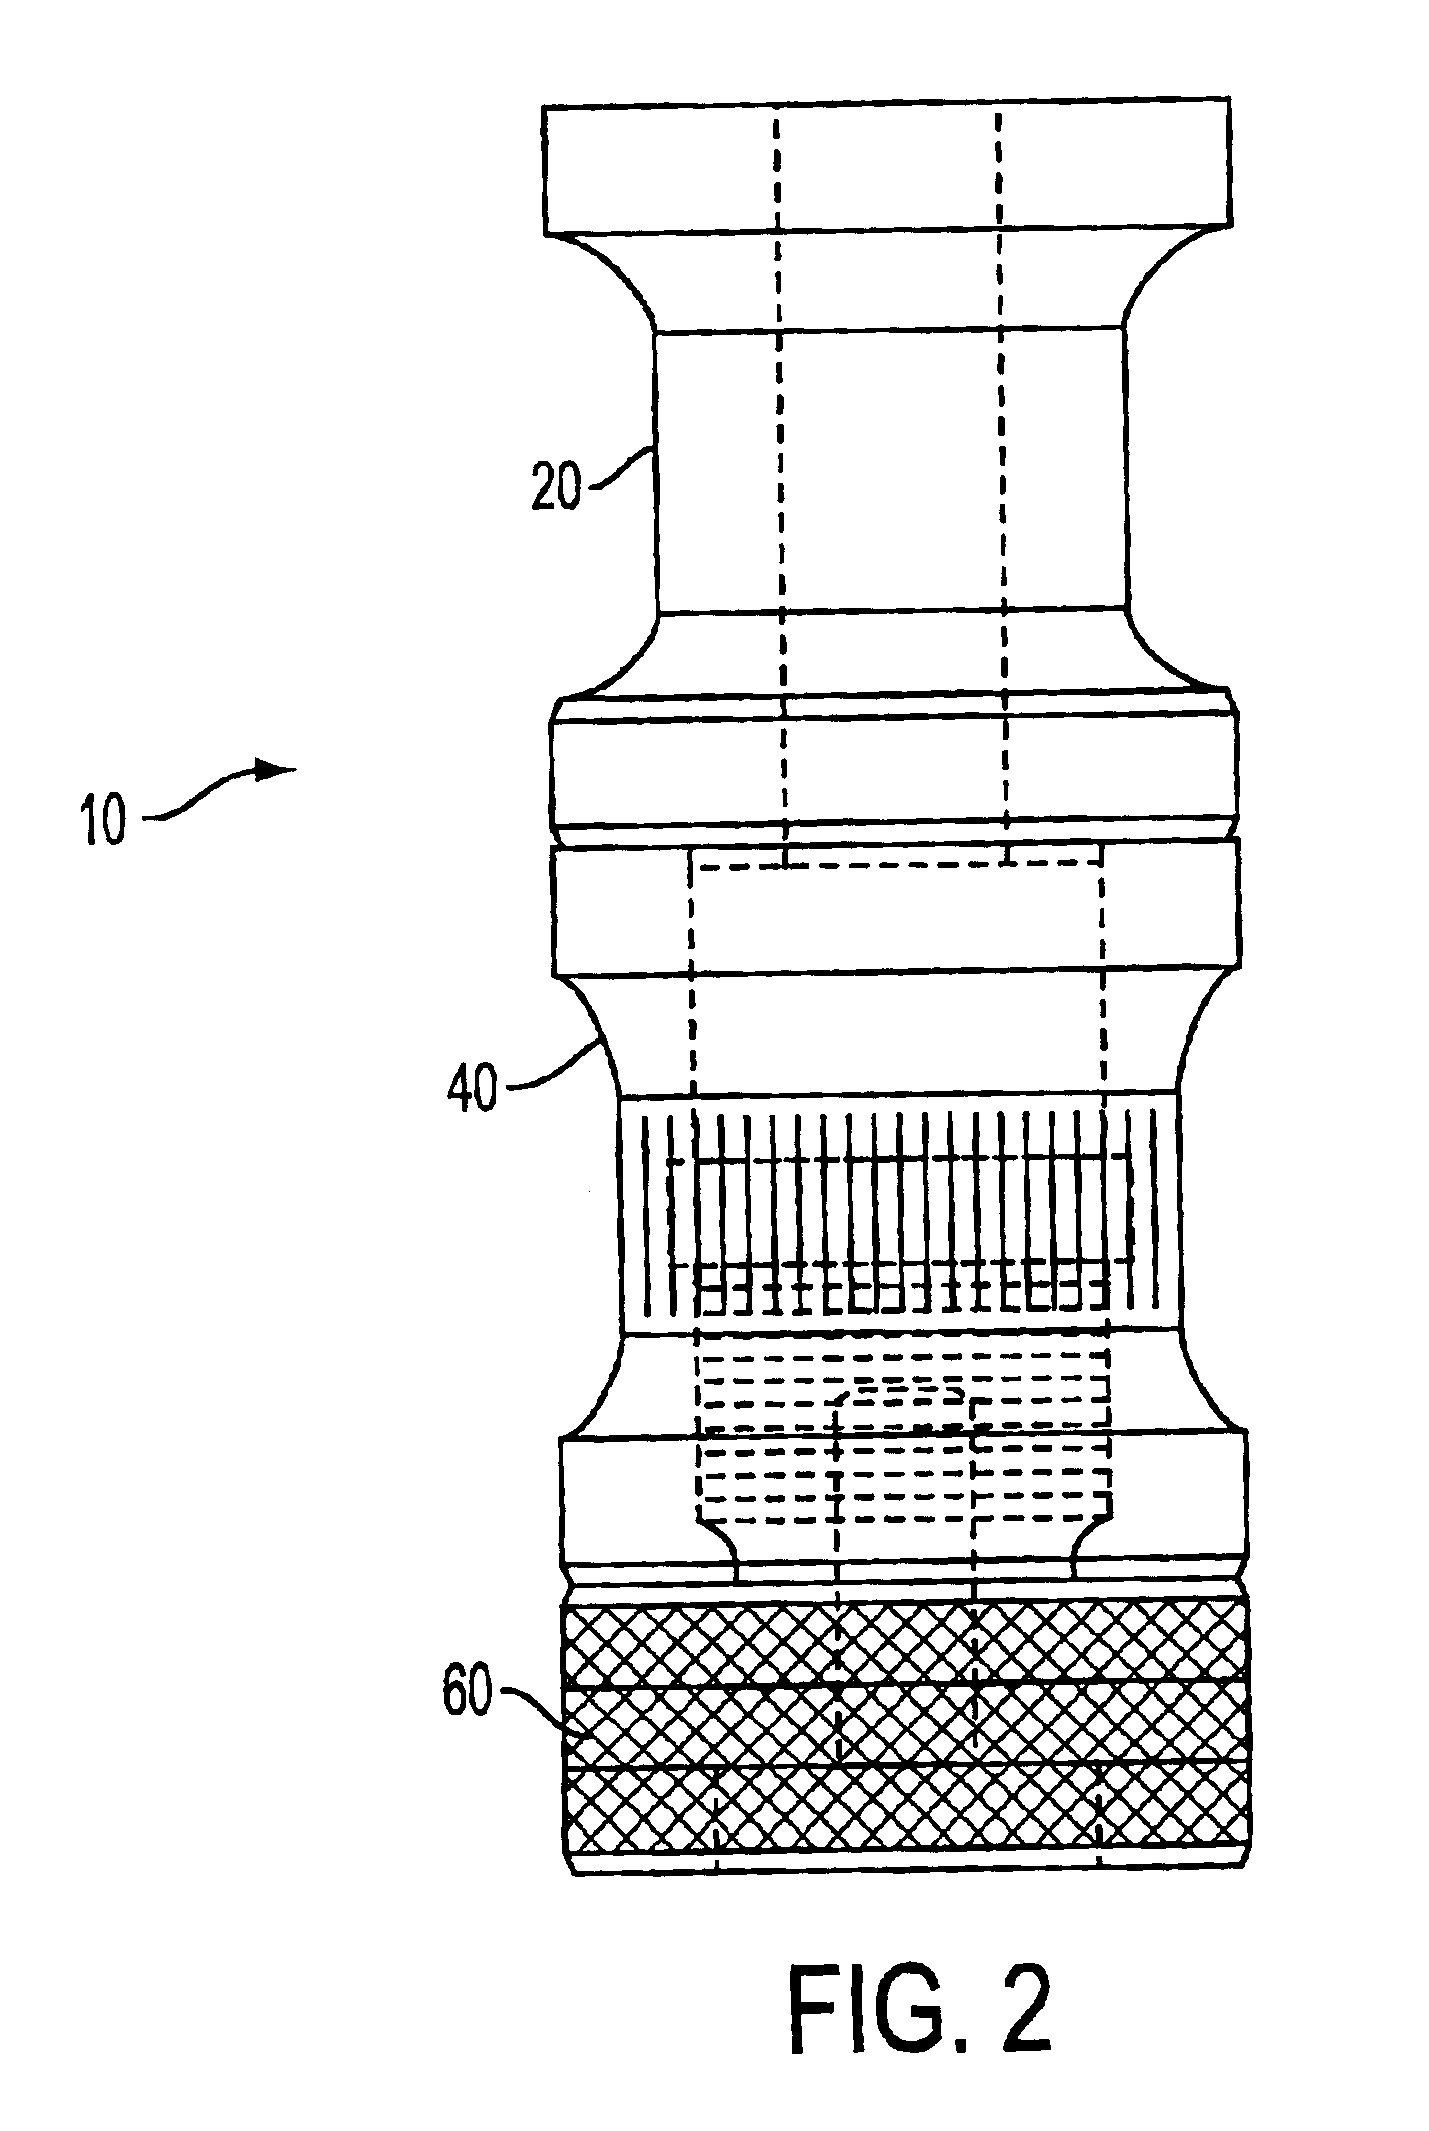 Method for predicting the suitability of a substance for dry granulation by roller compaction using small sample sizes